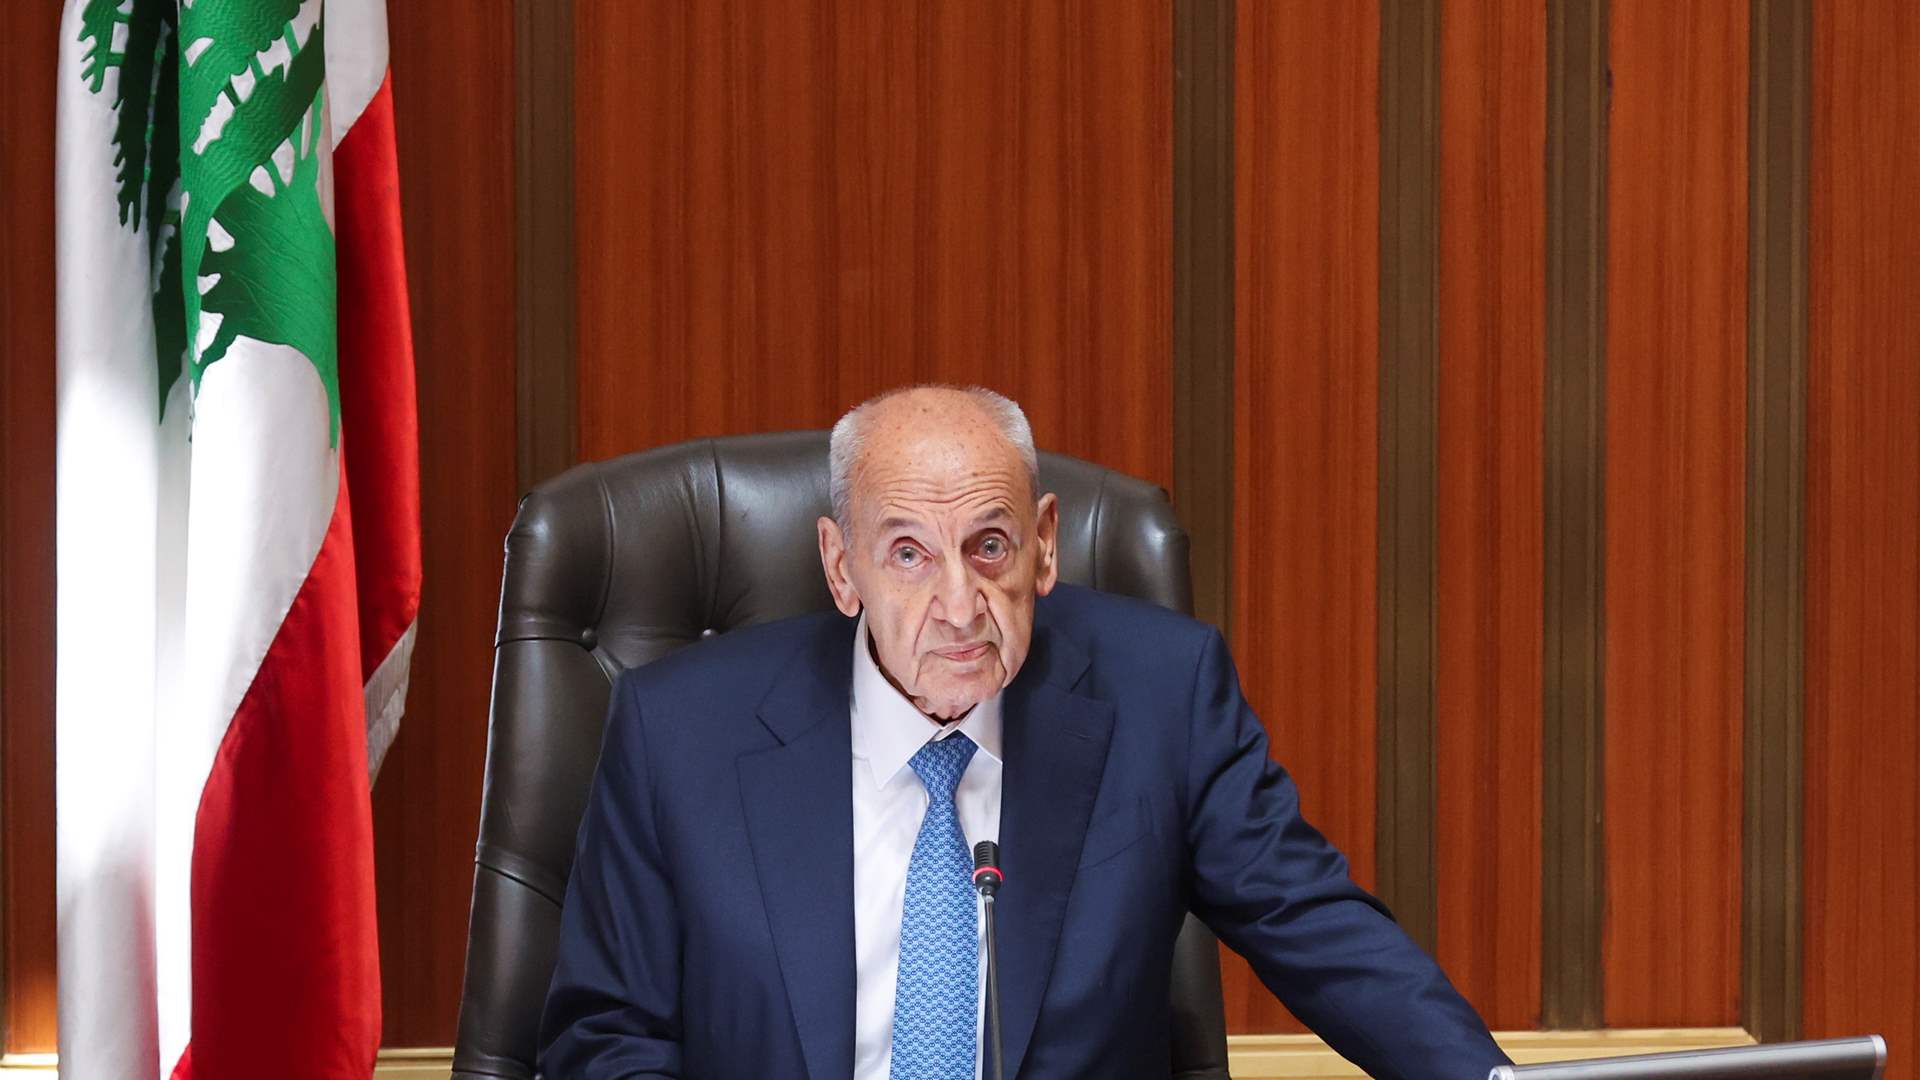 In pursuit of a united Lebanon: Parliament Speaker Nabih Berri calls for presidential elections on Resistance and Liberation Day